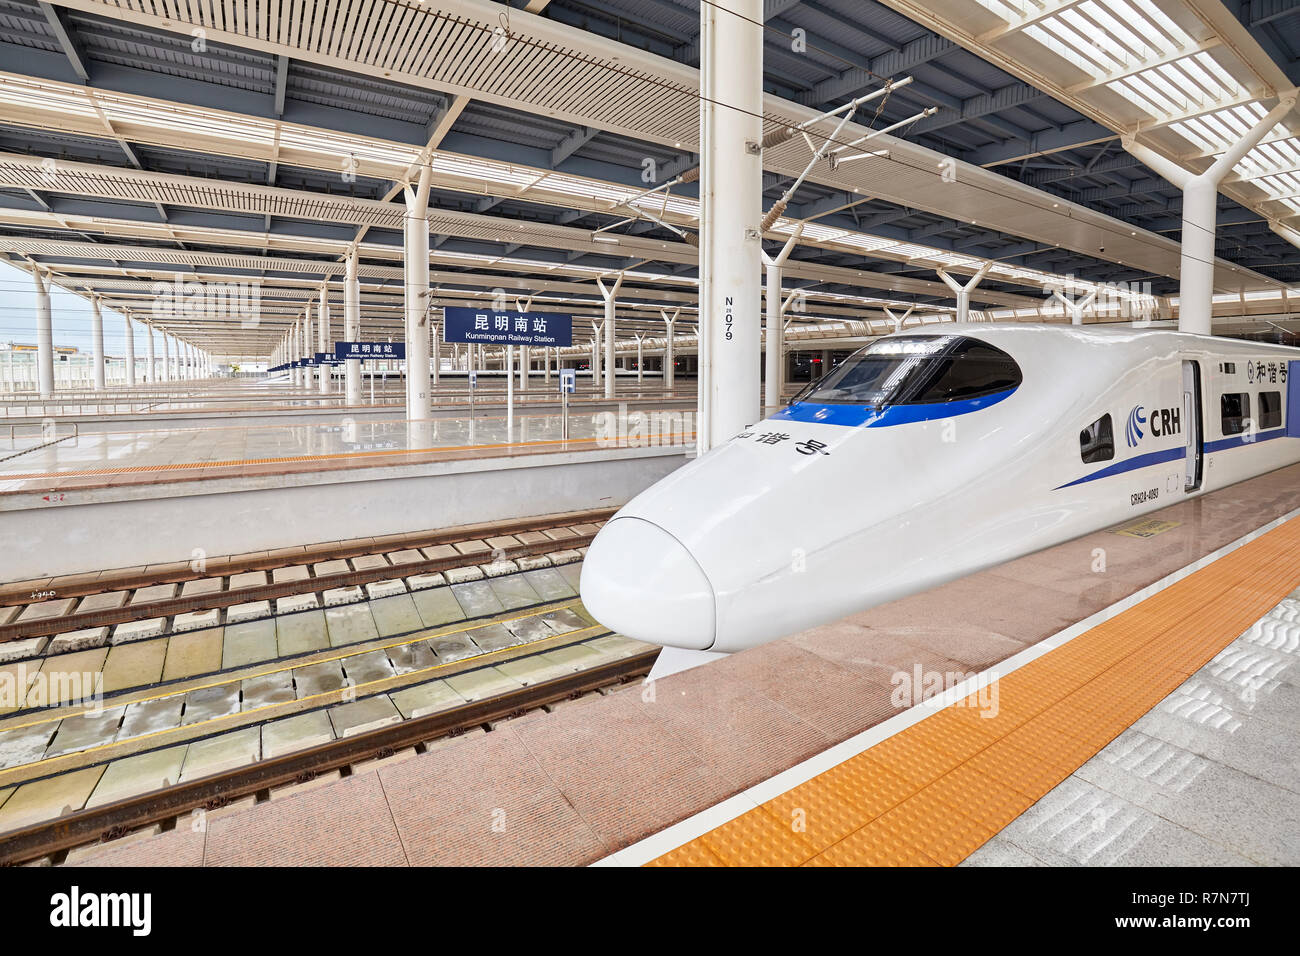 Kunming, China - September 21, 2017: High-speed train departs from the station. With railway network about 28 000 km long in 2018, High-speed rail (HS Stock Photo